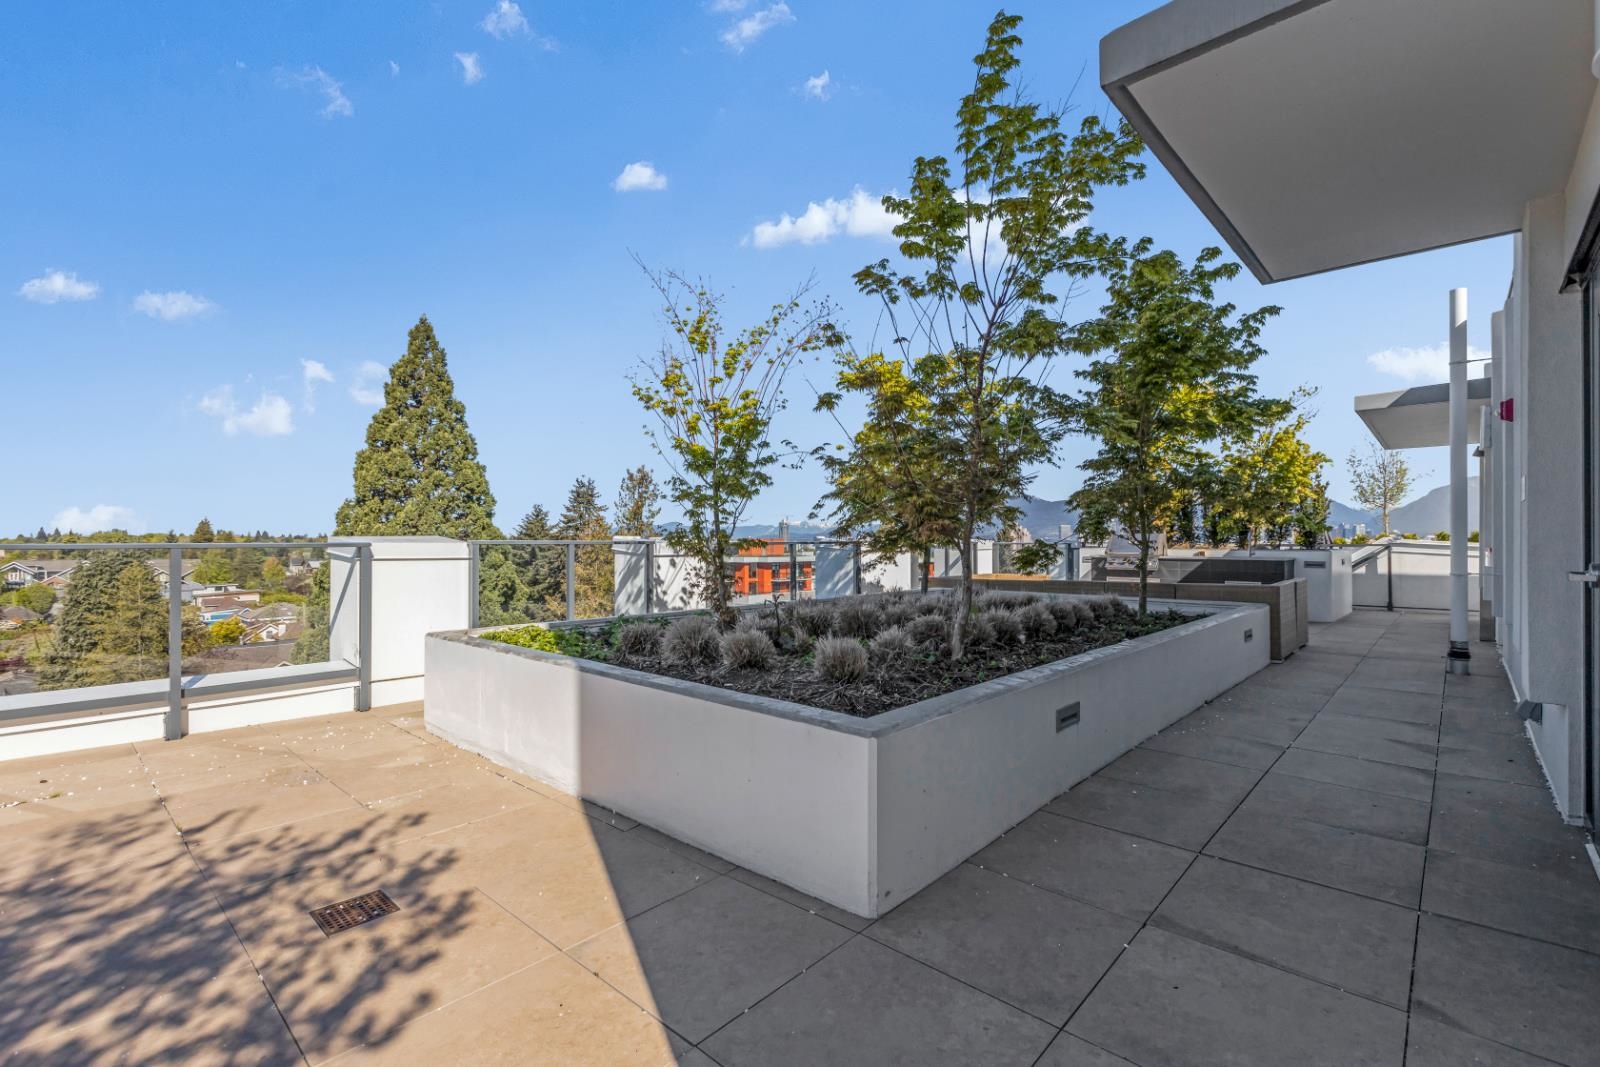 Listing image of 307 4240 CAMBIE STREET